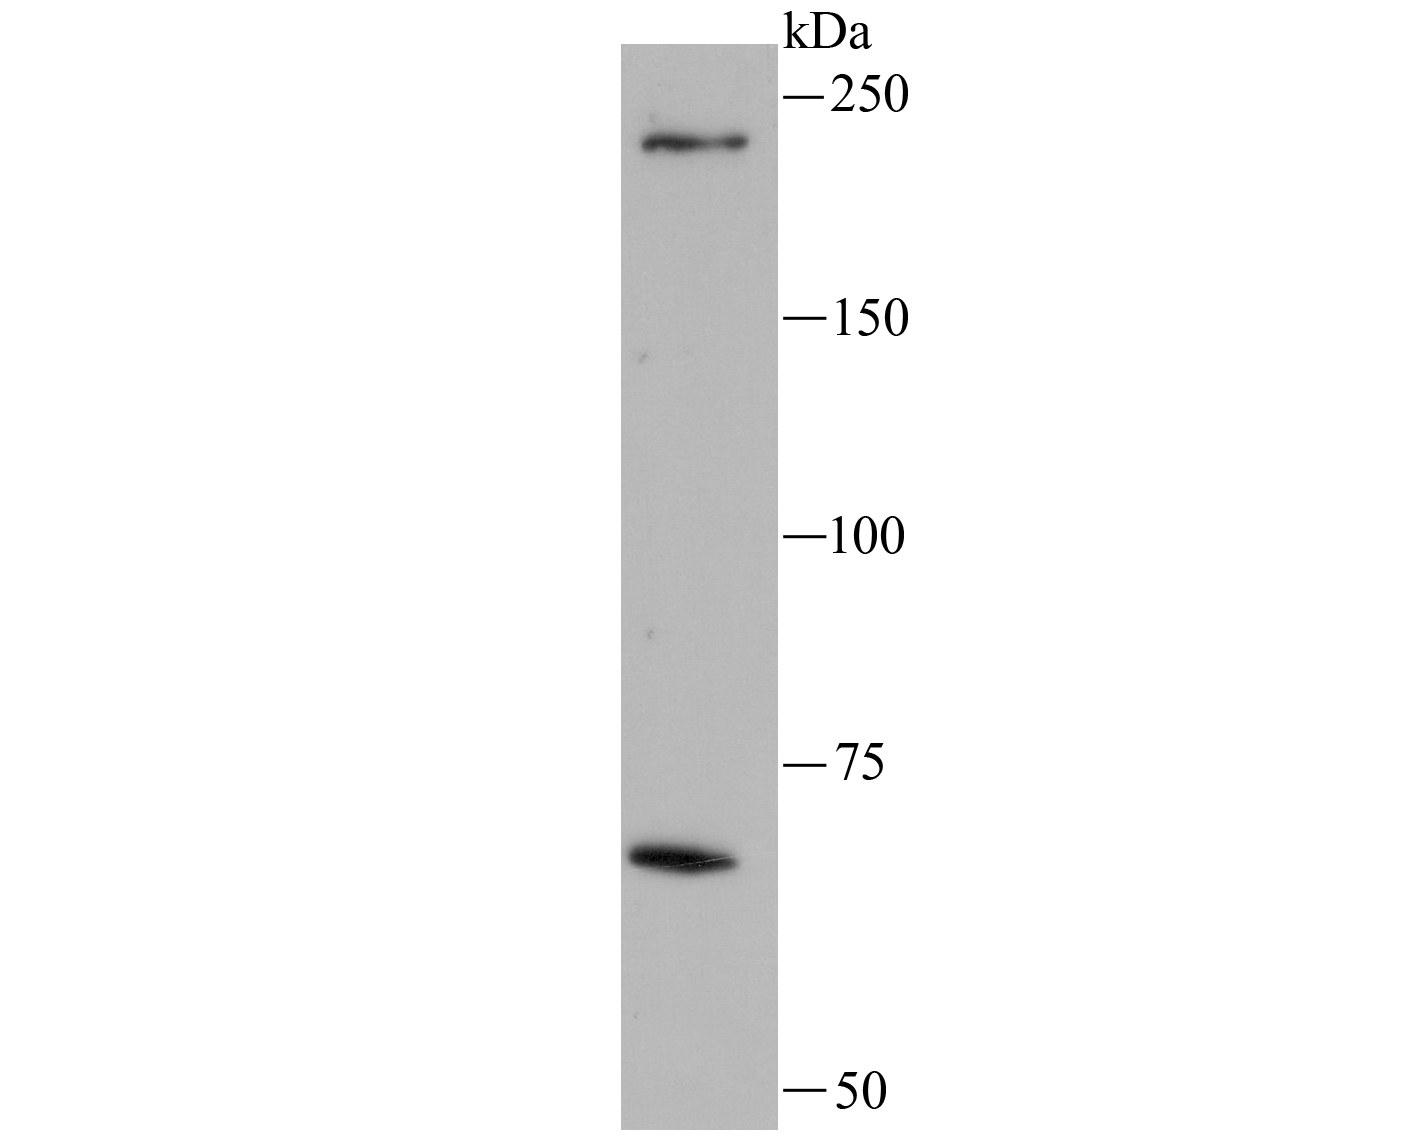 Western blot analysis of LRRK1 on A549 lysate using anti-LRRK1 antibody at 1/100 dilution.